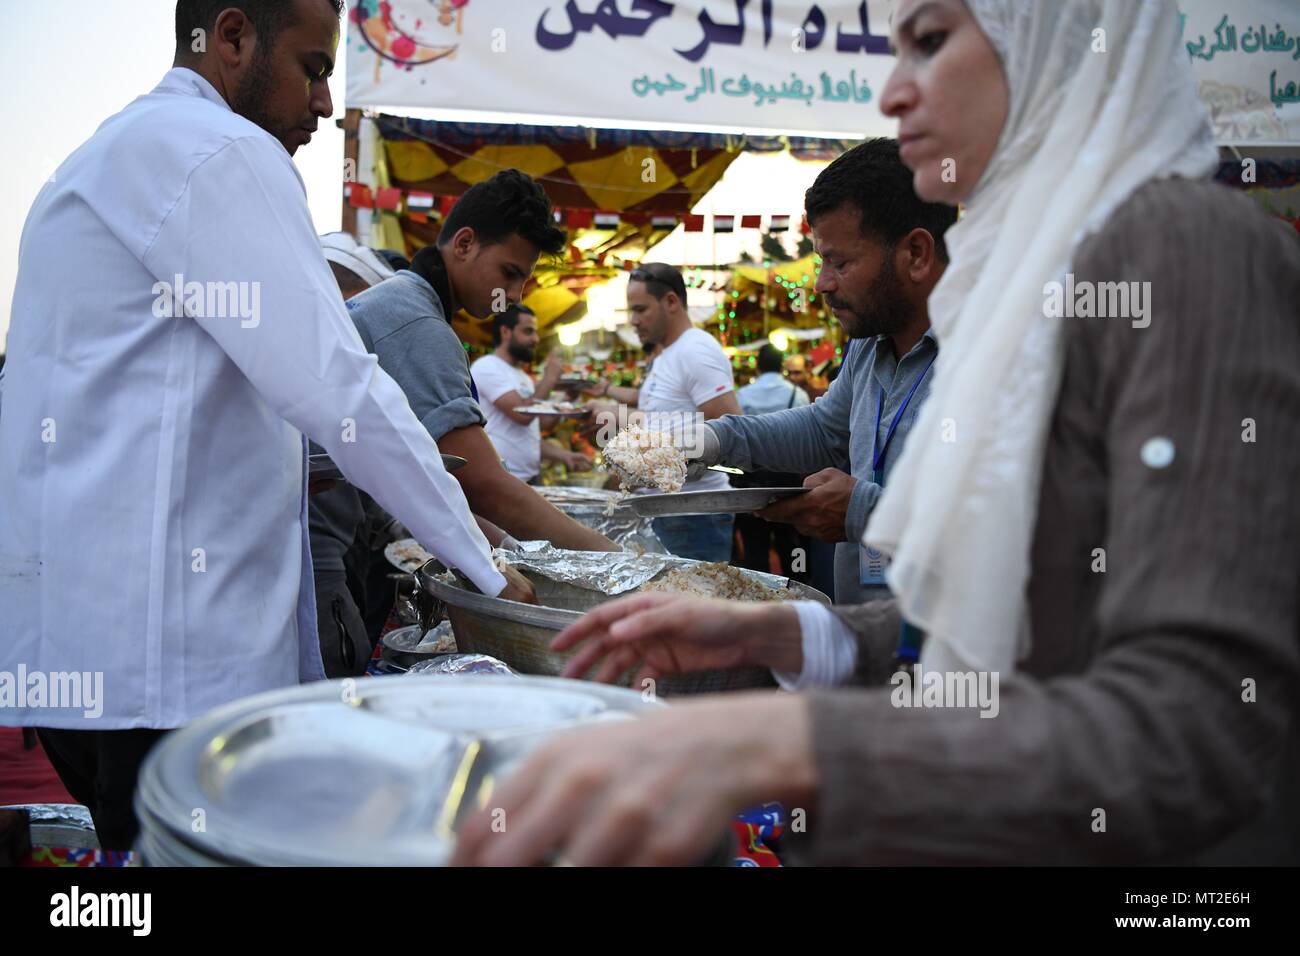 Cairo, Egypt. 27th May, 2018. People prepare the iftar meal during a charity event in Cairo, Egypt, on May 27, 2018. Dozens of Chinese companies on Sunday sent hundreds of food boxes to the needy people and held a charity iftar table in Cairo's Maadi district, sharing the joy of Egyptians during the holy month of Ramadan. Credit: Wu Huiwo/Xinhua/Alamy Live News Stock Photo